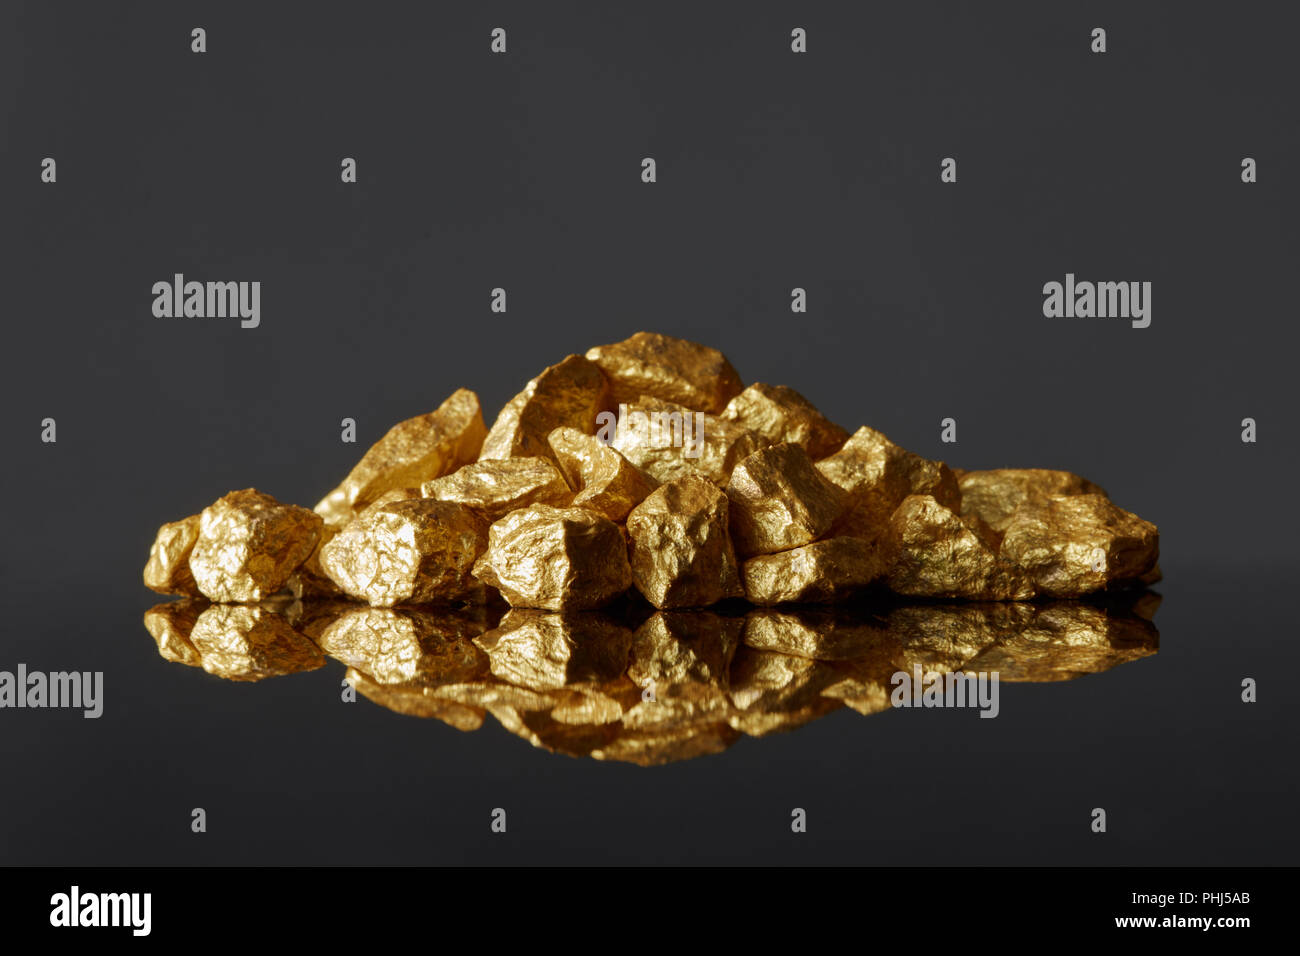 Mound of gold nuggets on a black reflective surface background Stock Photo